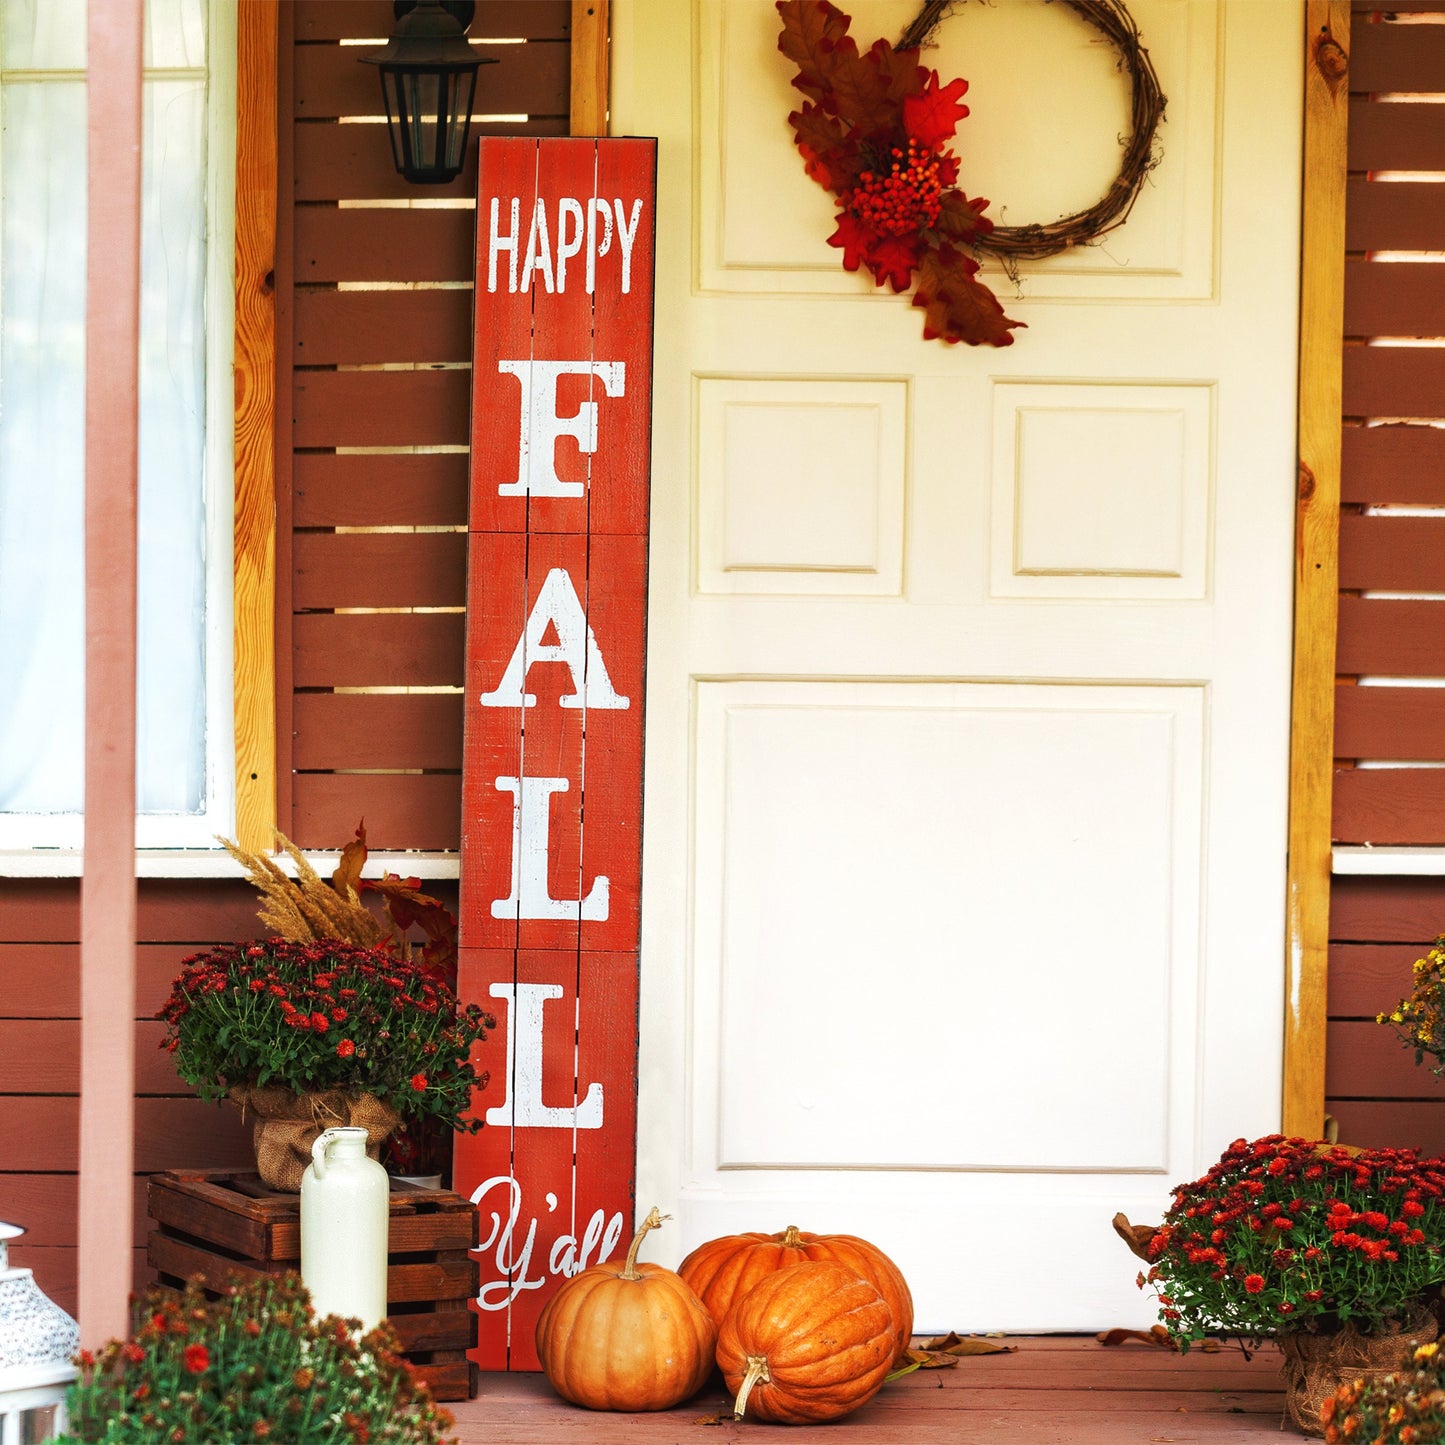 72in Outdoor Happy Fall Y'all Rustic Craft Porch Sign for Front Door, 6ft Vertical Wooden Welcome Sign for Front Porch